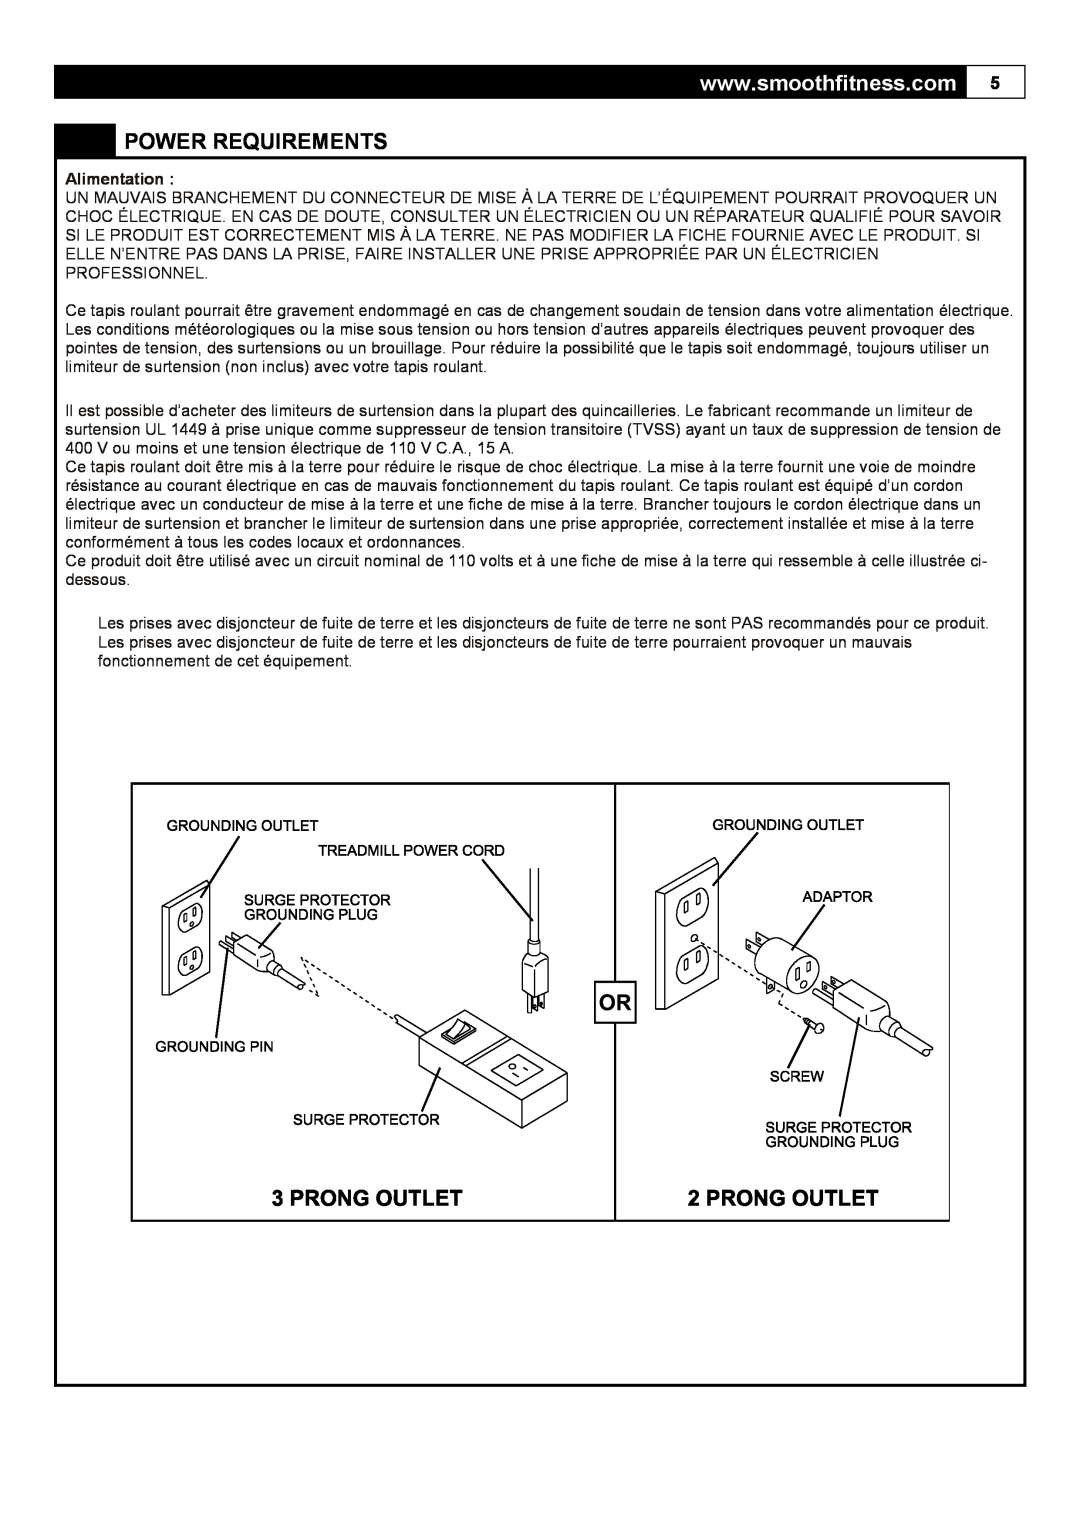 Smooth Fitness 5.65I user manual Power Requirements, Alimentation 